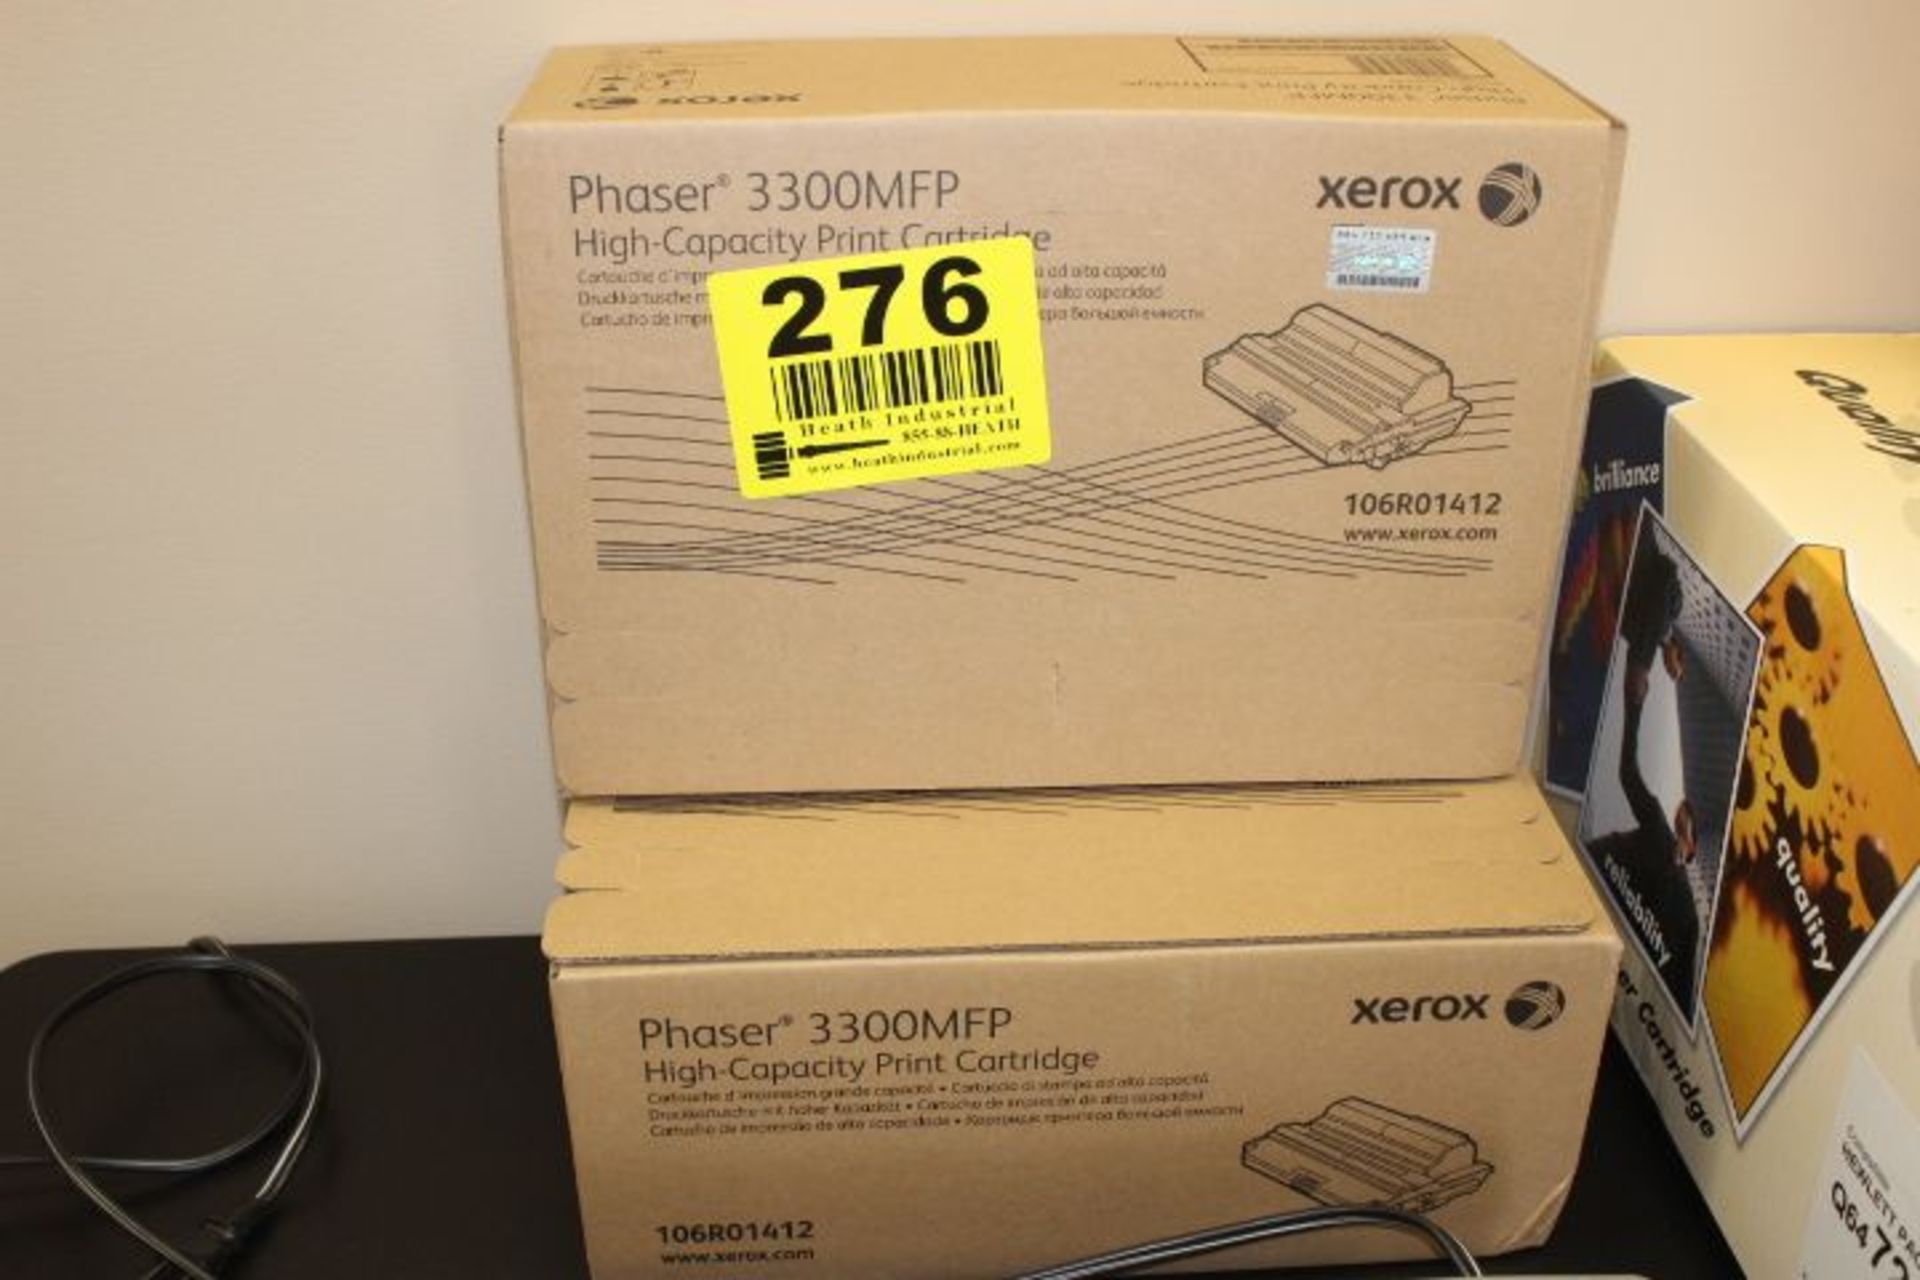 (2) BOXES OF XEROX PHASER 3300MFP